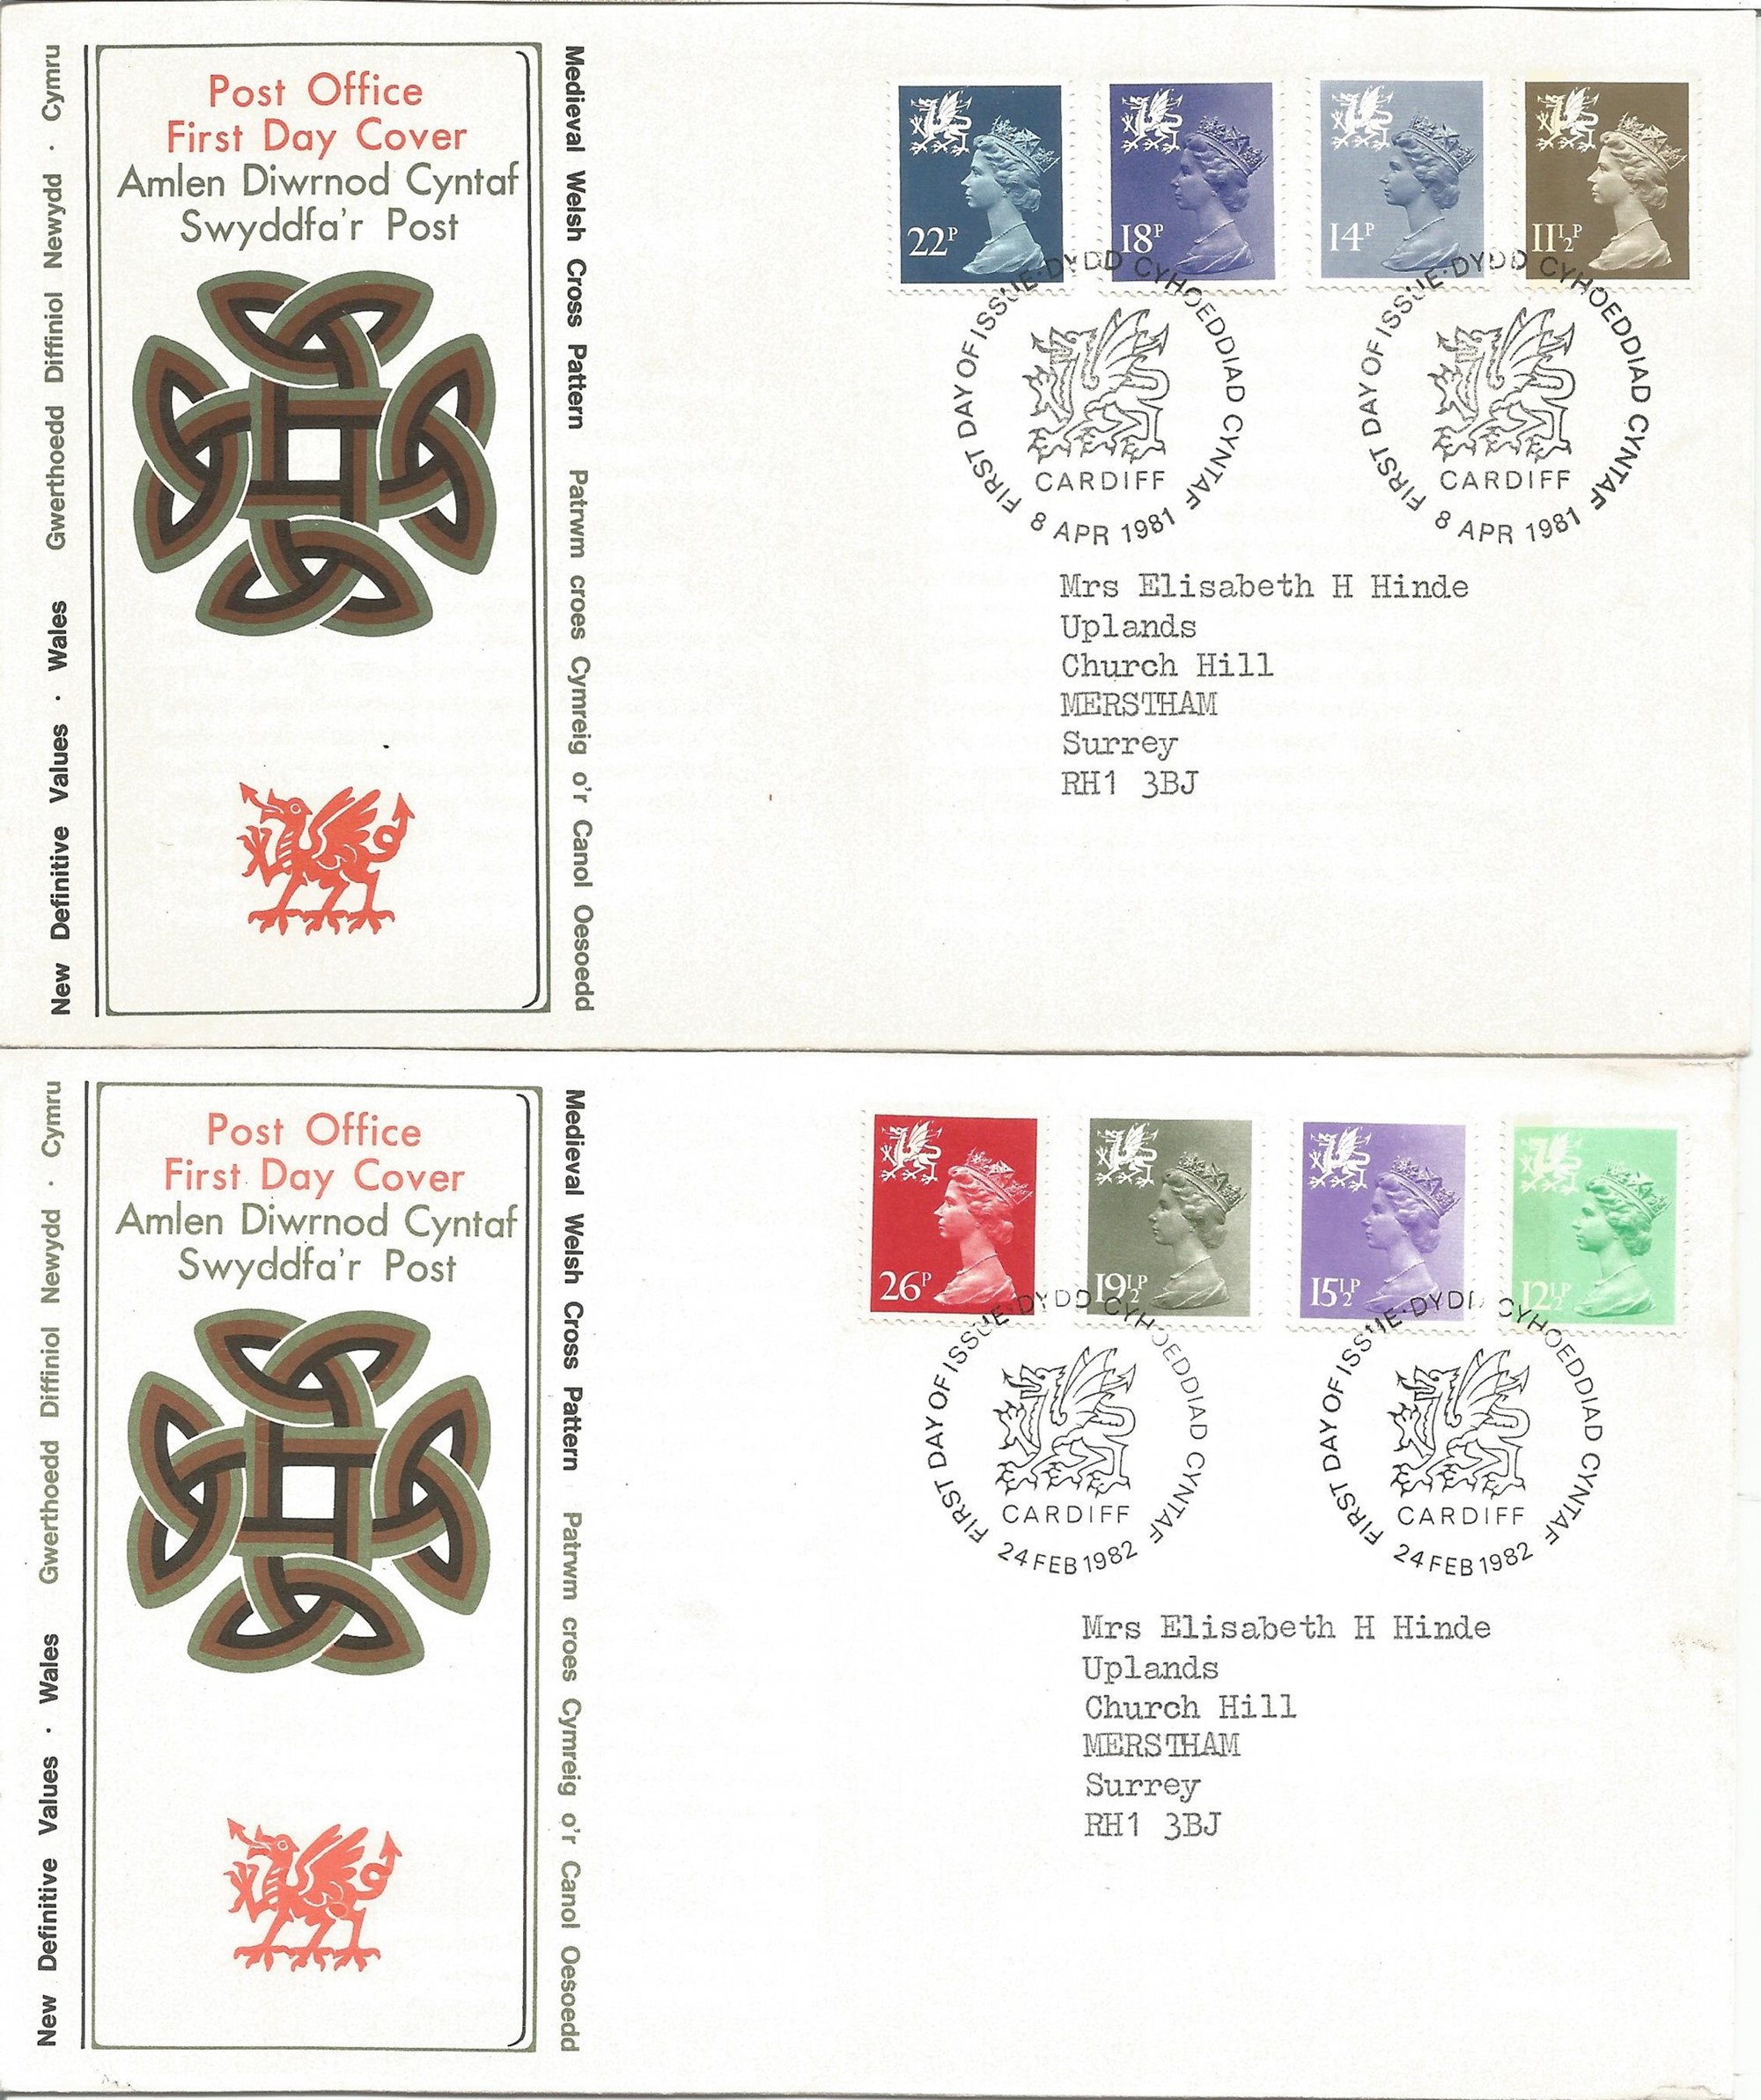 GB regionals FDC collection. Includes 9 Wales 1981/2005, 8 Scotland 1981/2005 and 9 Northern - Image 2 of 3